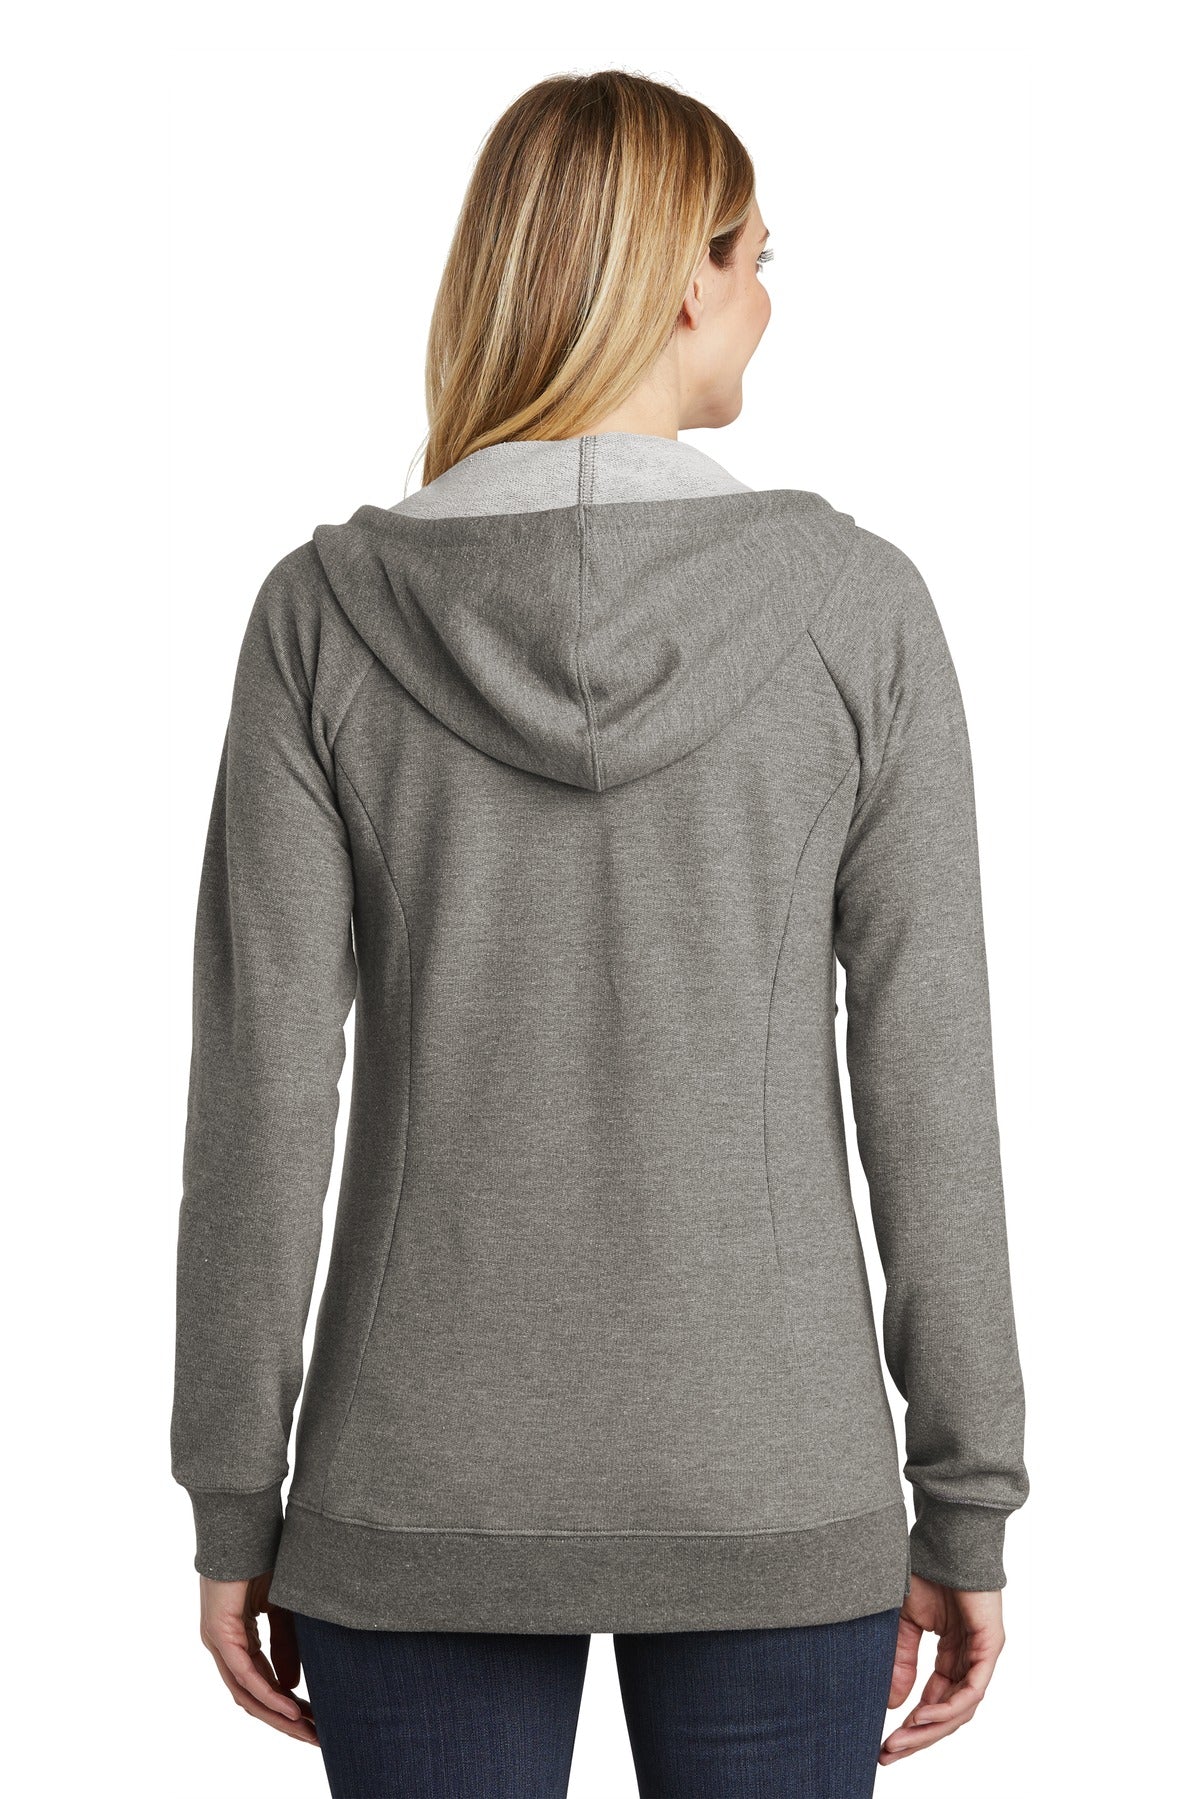 District Women's Perfect Tri French Terry Full-Zip Hoodie. DT456